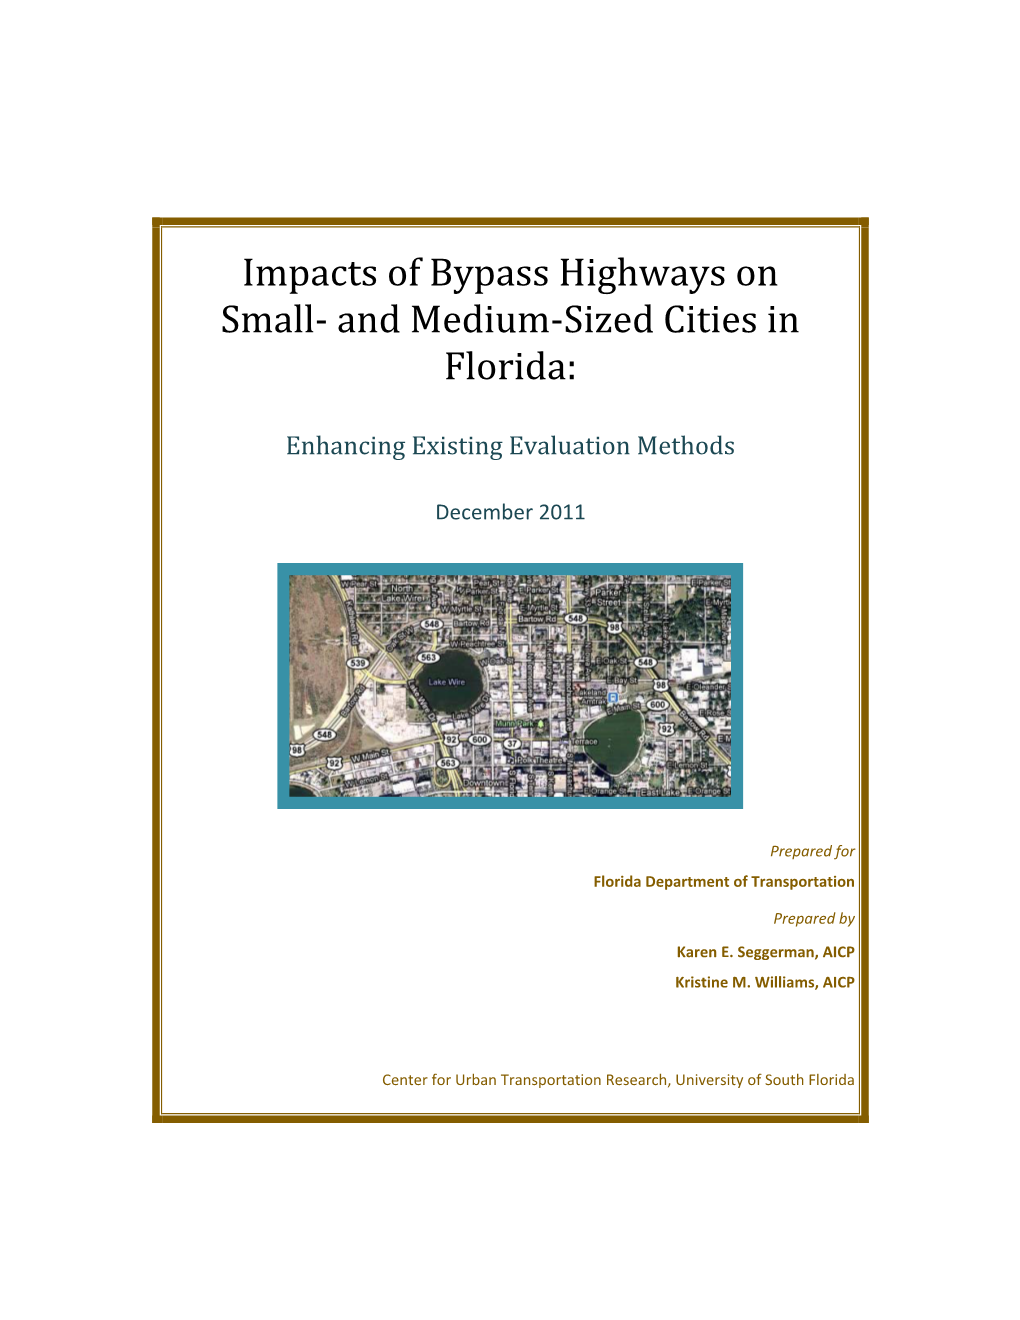 Impacts of Bypass Highways on Small‐ and Medium‐Sized Cities in Florida